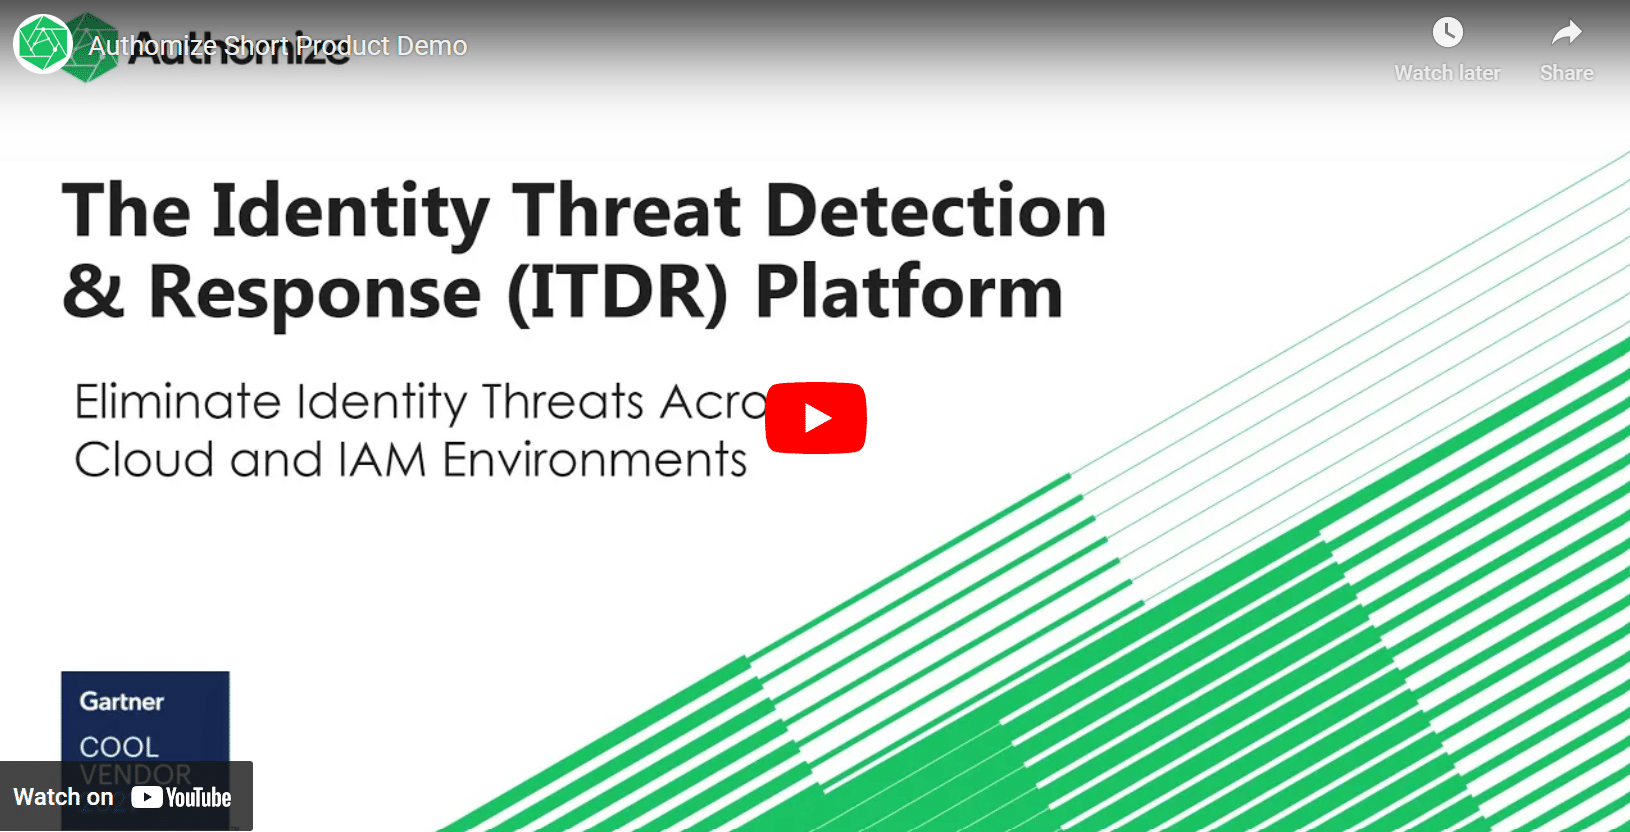 5 Minute Intro to Authomize's ITDR Platform